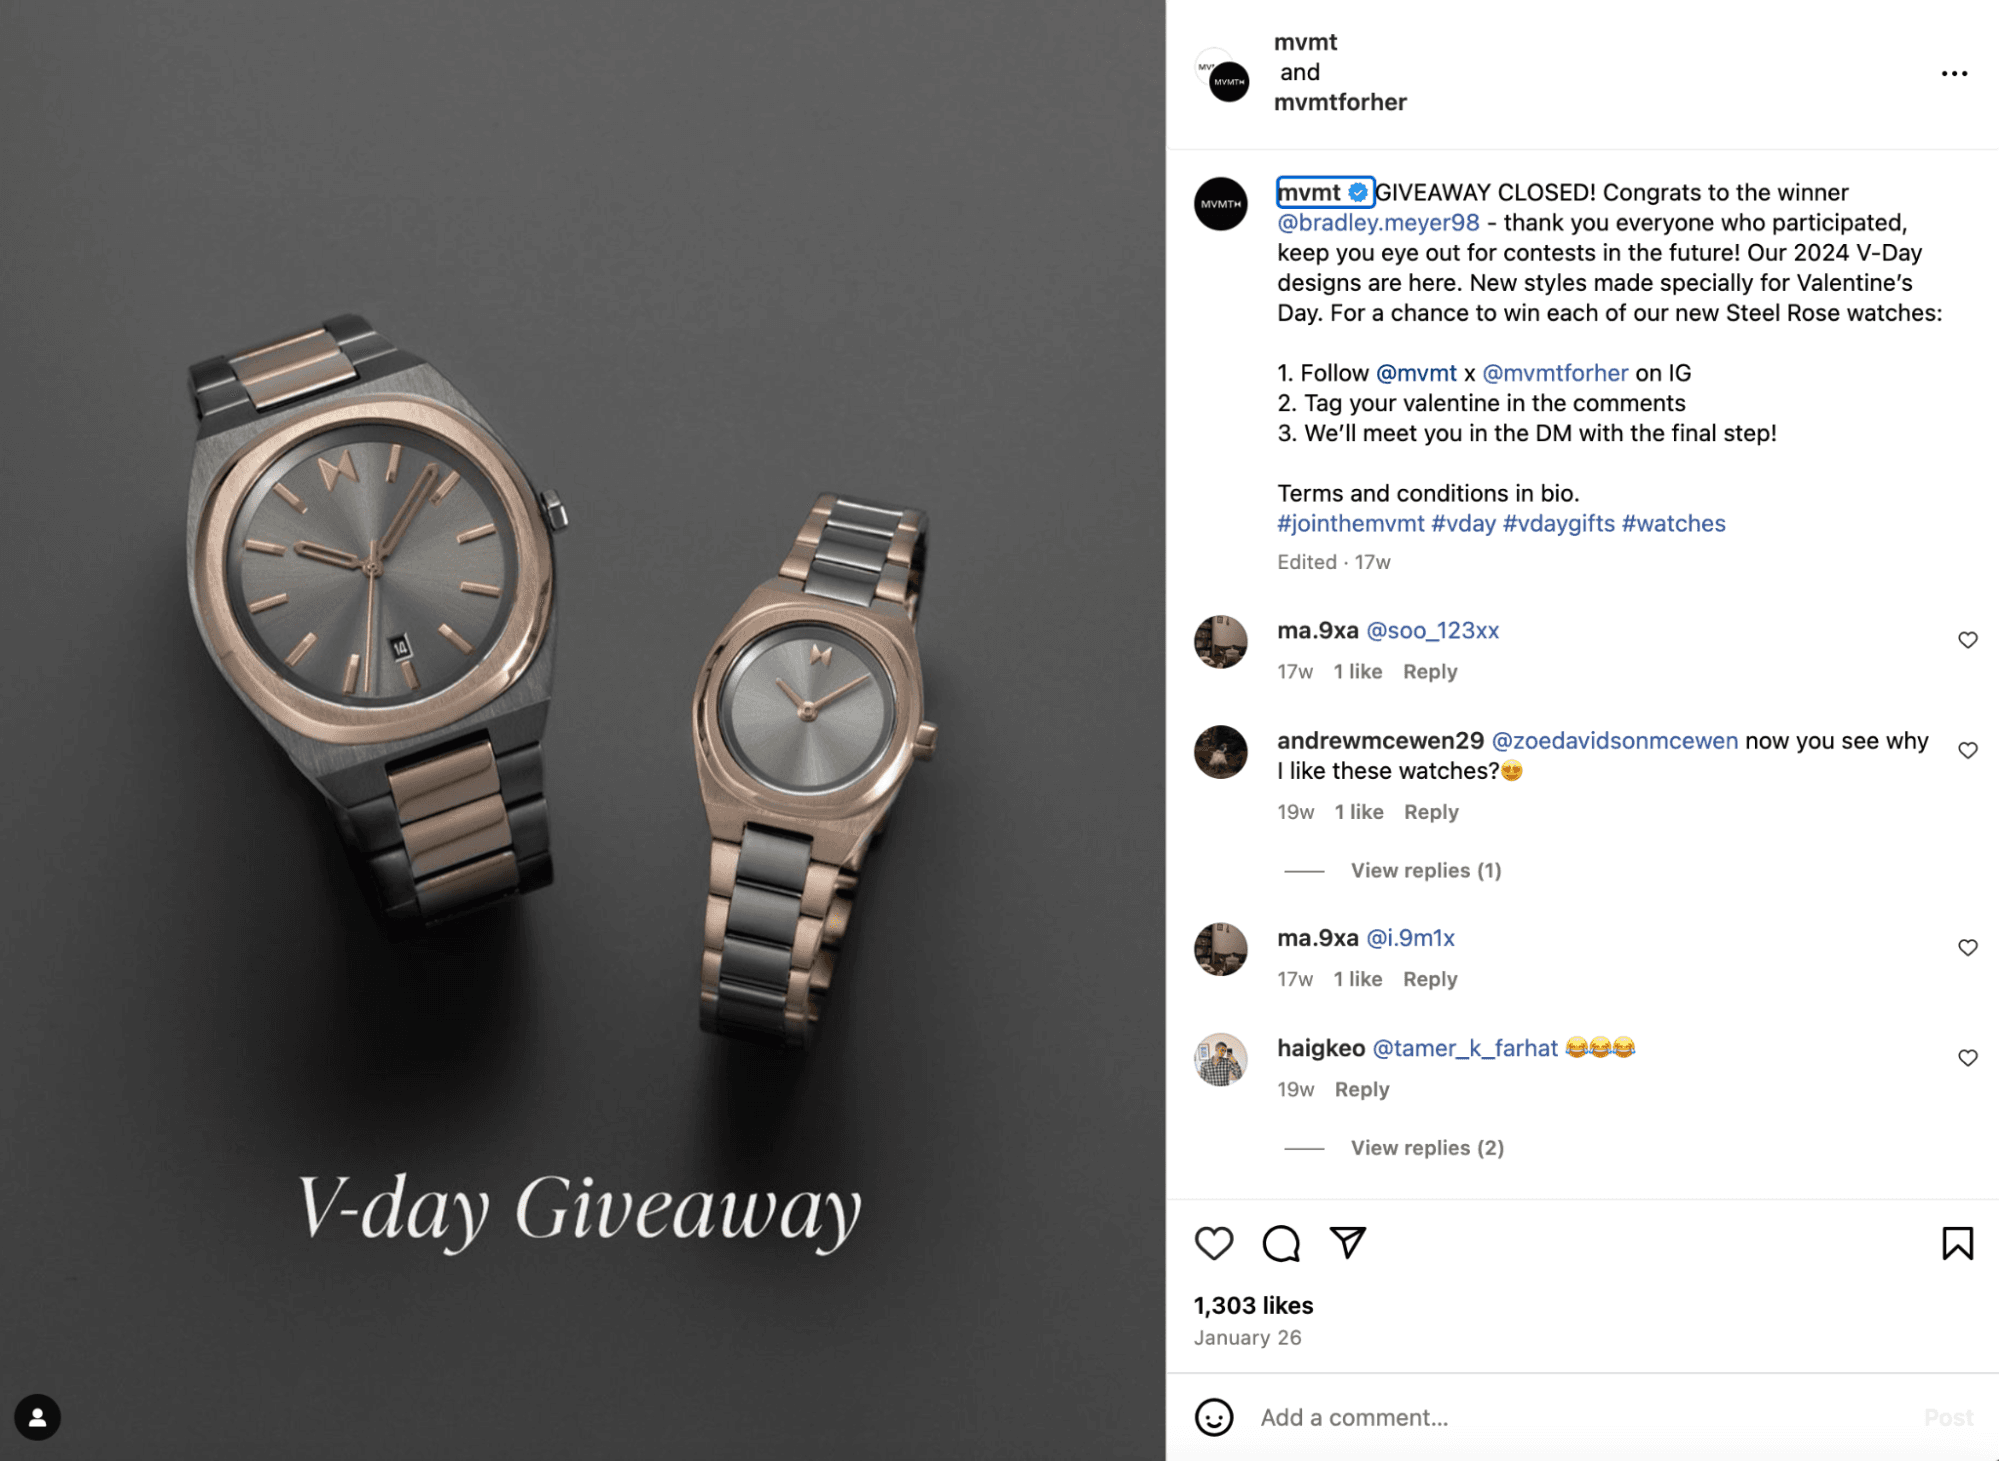 MVMT announced the winner of the giveaway on Instagram 